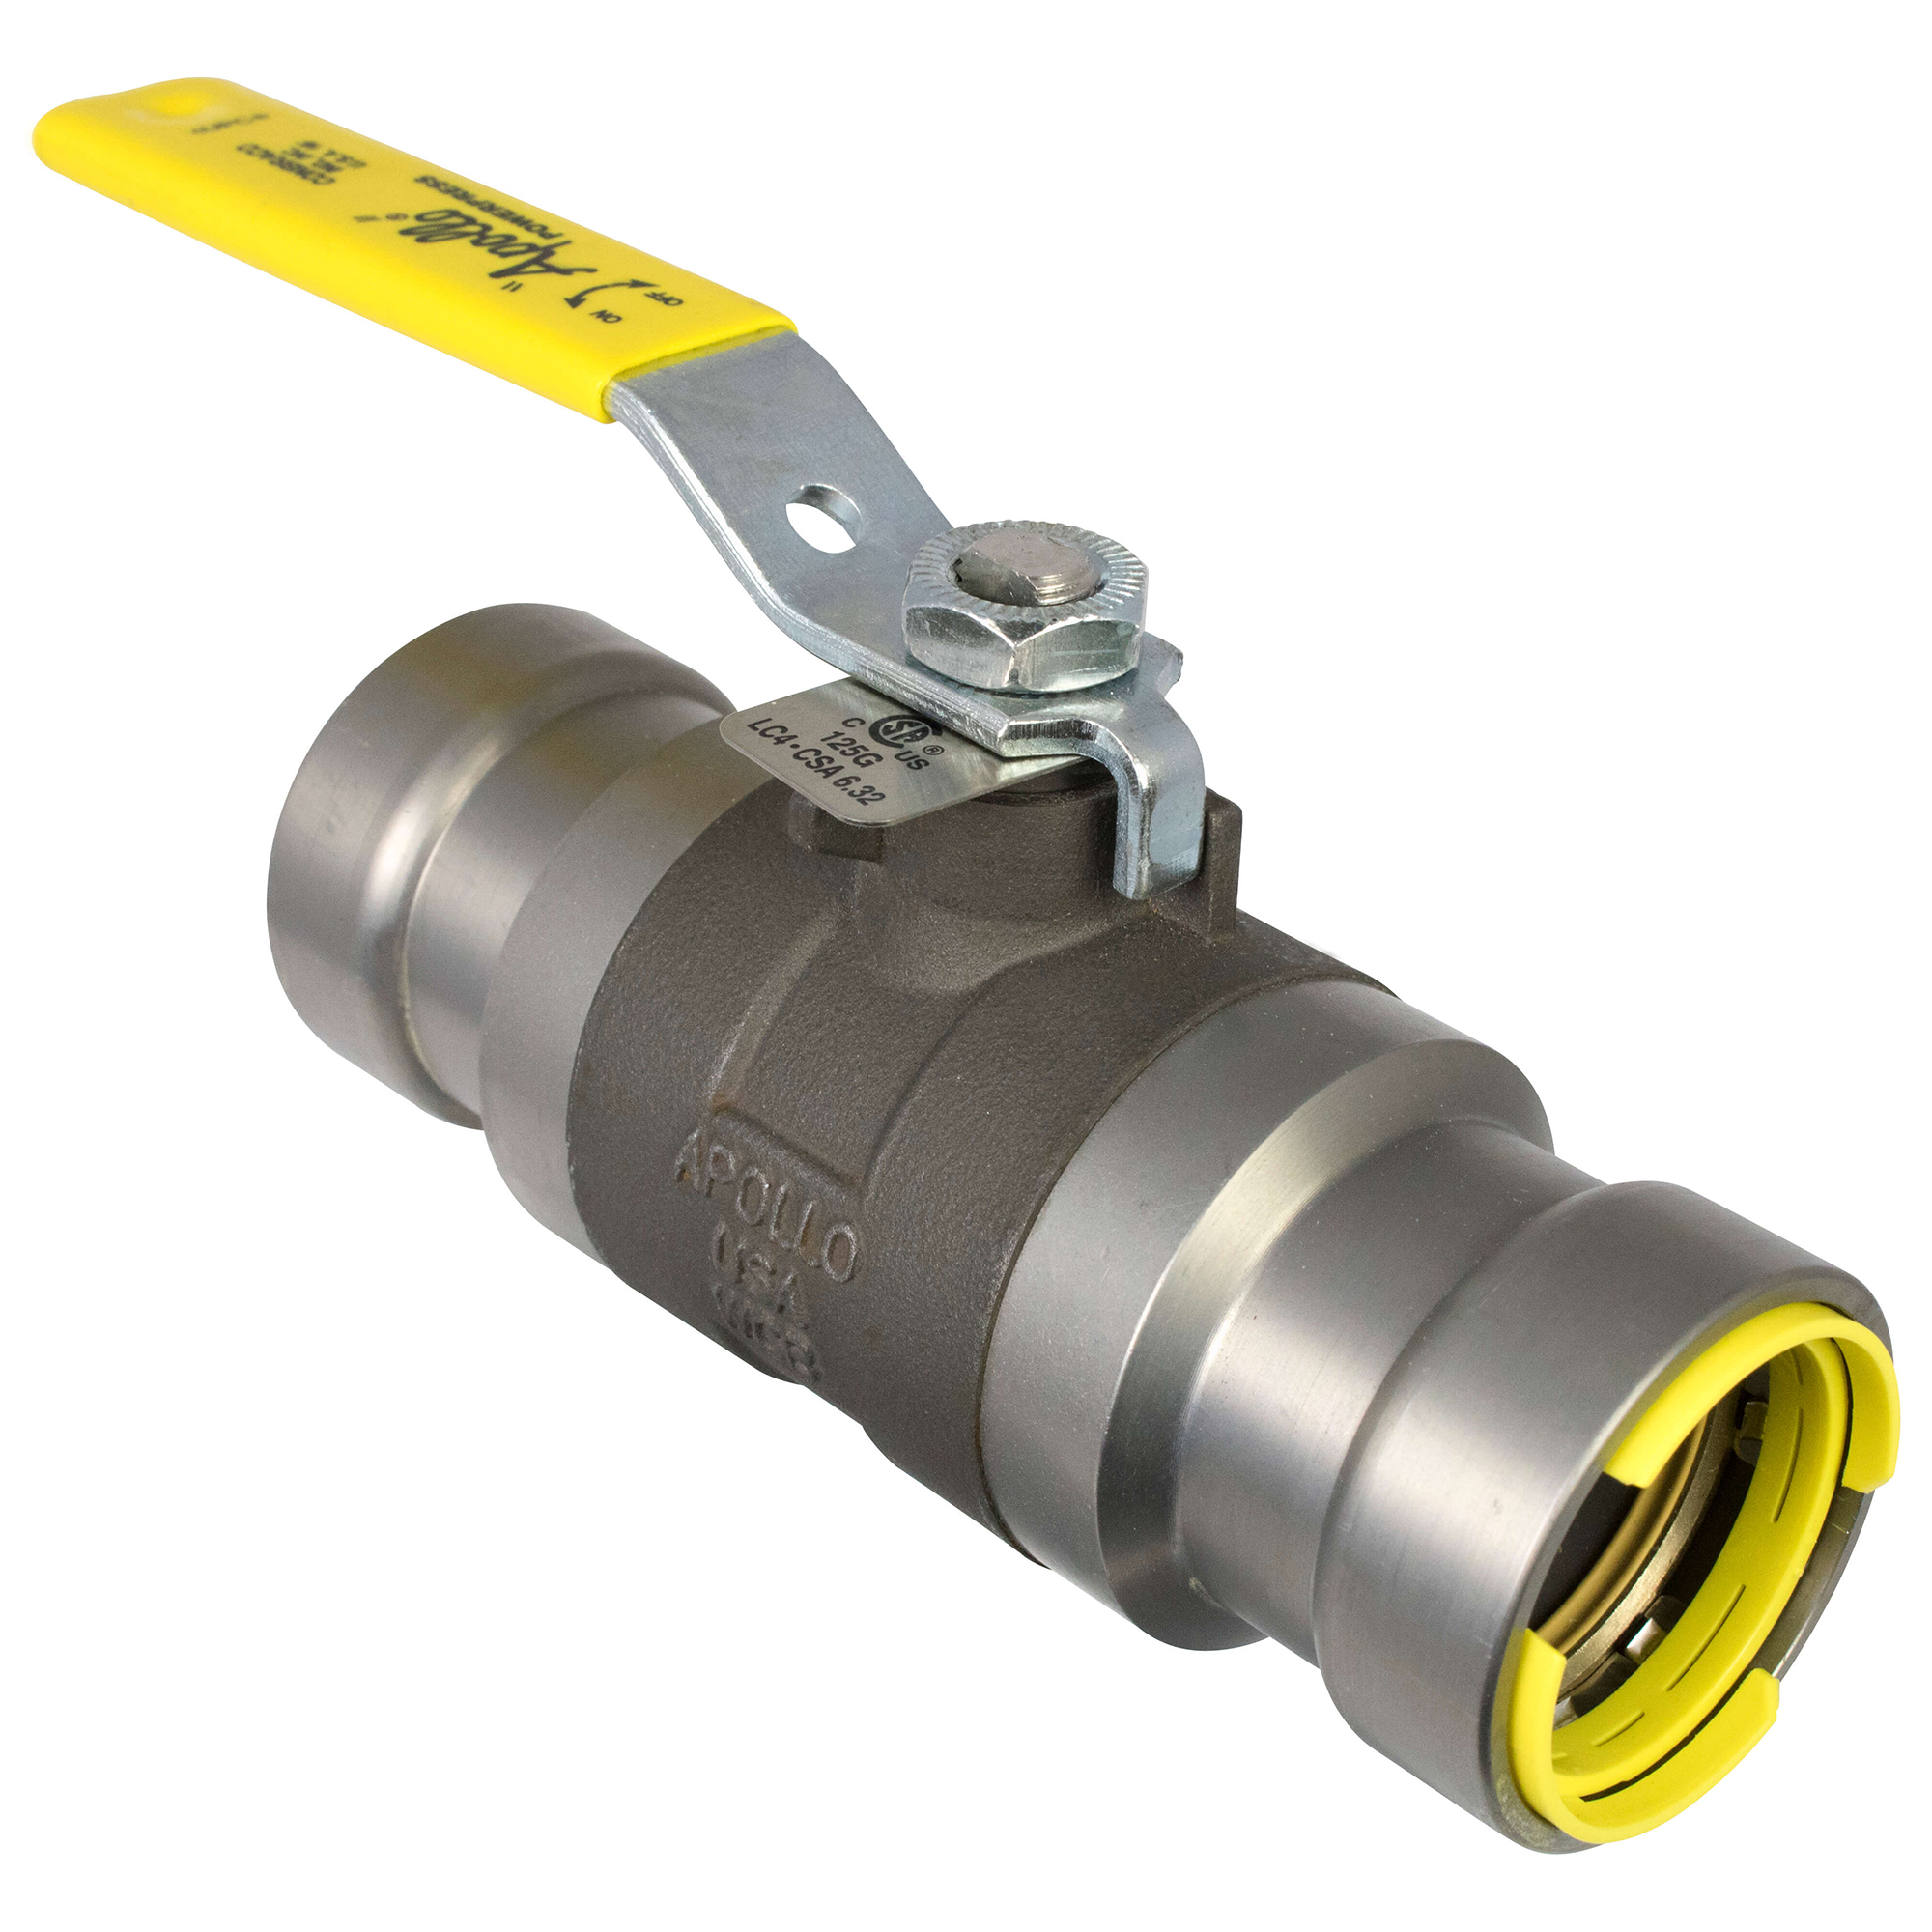 Apollo® POWERPRESS 89FVH4501 Ball Valve With Handle, 1 in, Carbon Steel Body, Full Port, HNBR/PTFE Softgoods, Domestic